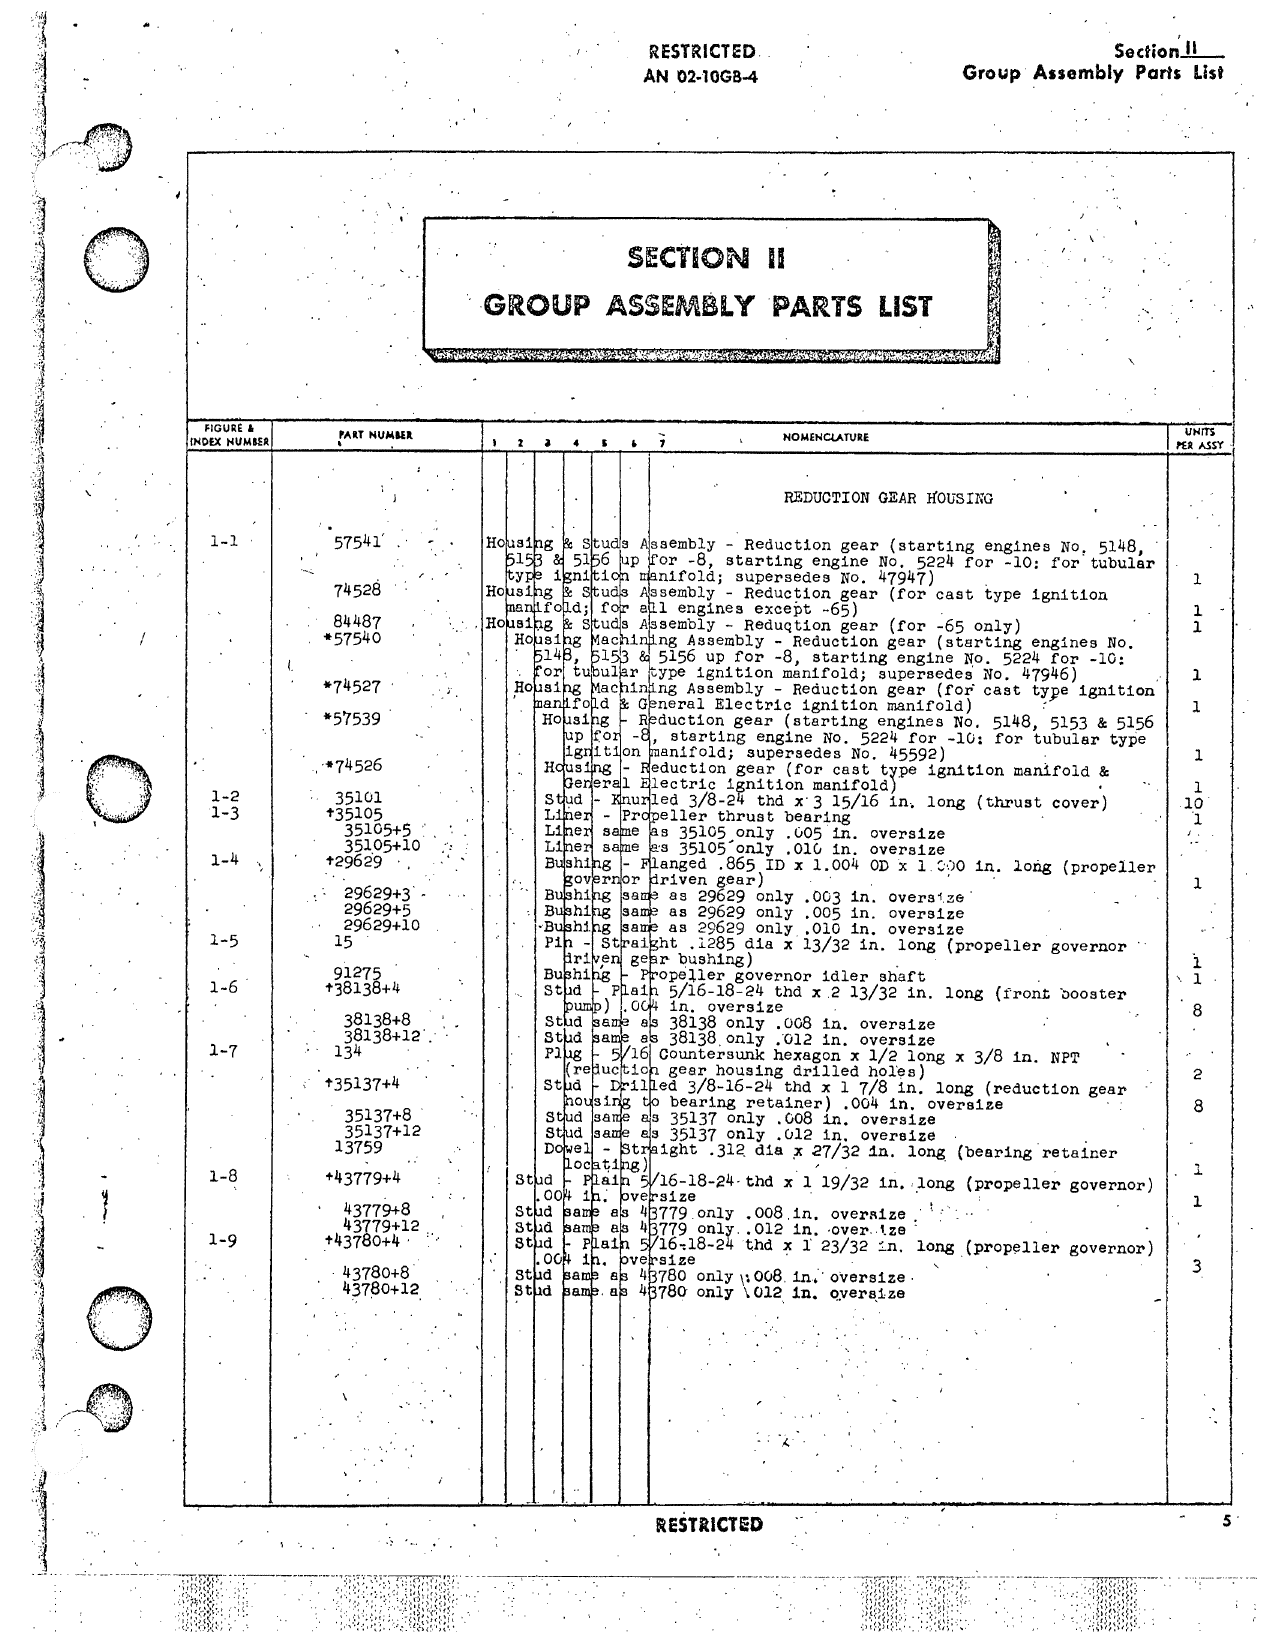 Sample page 9 from AirCorps Library document: Parts Catalog for Aircraft Engine Models R-2800-8, -8W, -10, -10W, and -65 